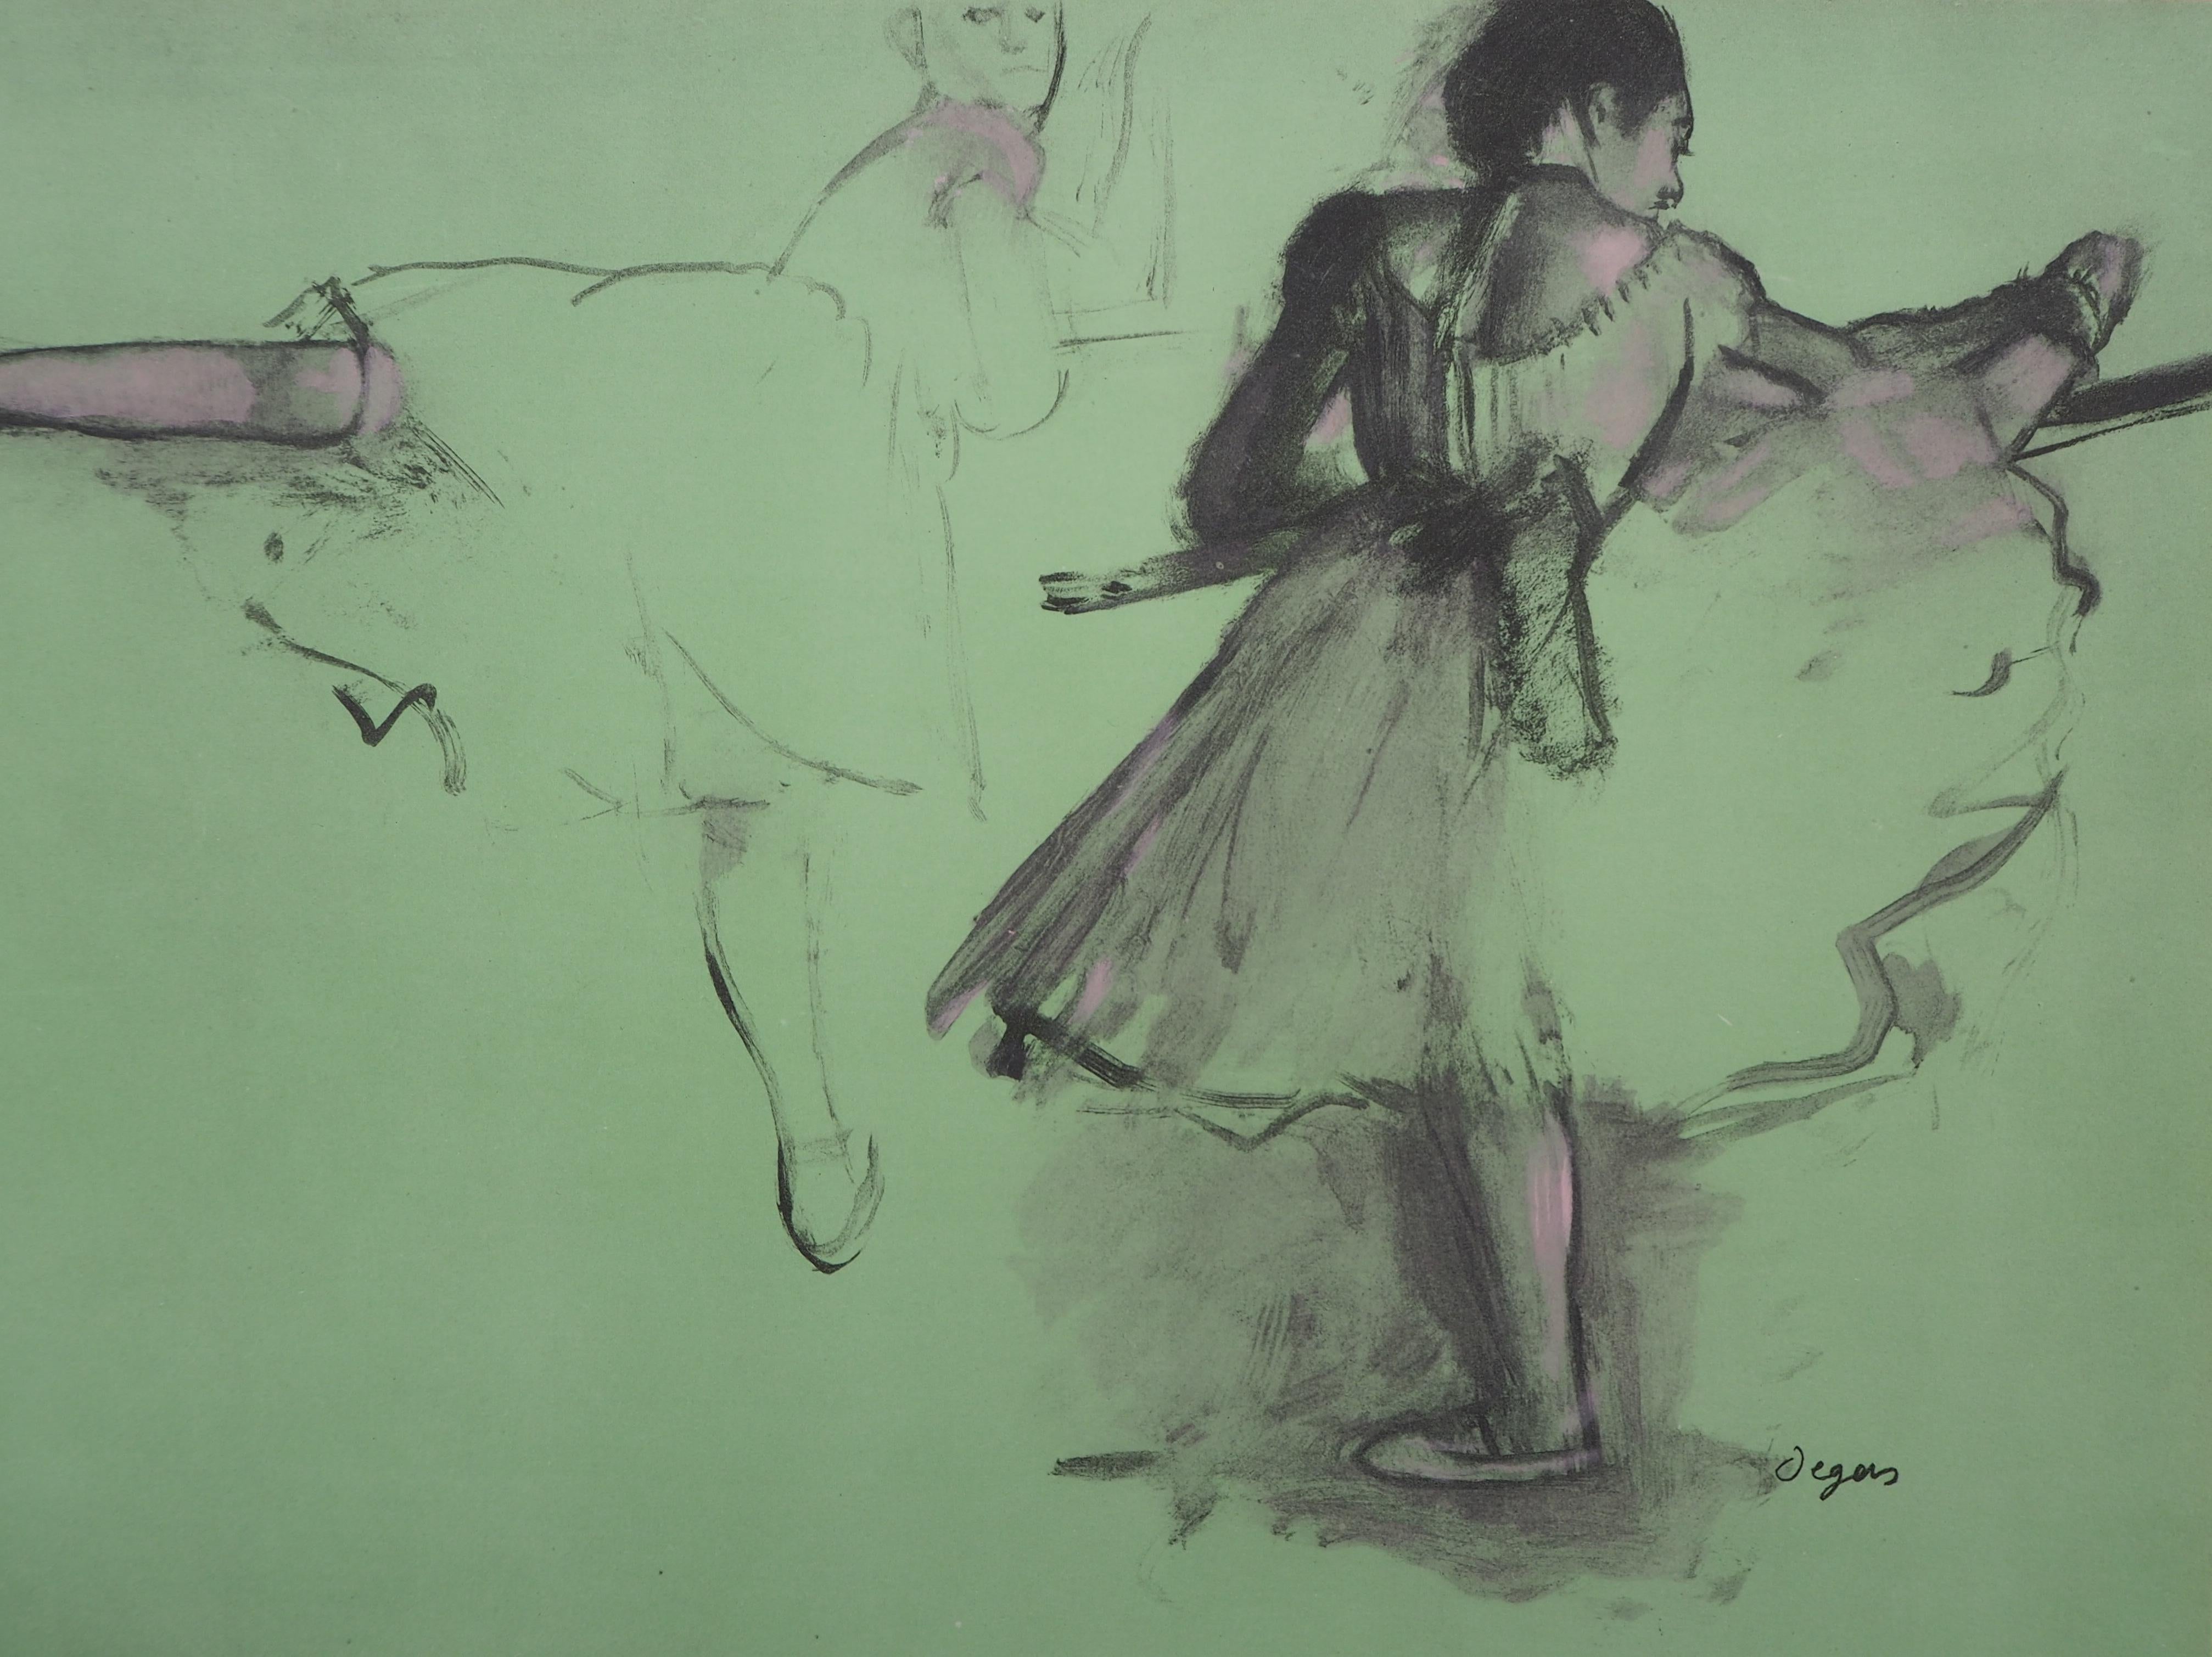 Ballerinas at Training  - Lithograph and Watercolor stencil - Gray Figurative Print by (after) Edgar Degas